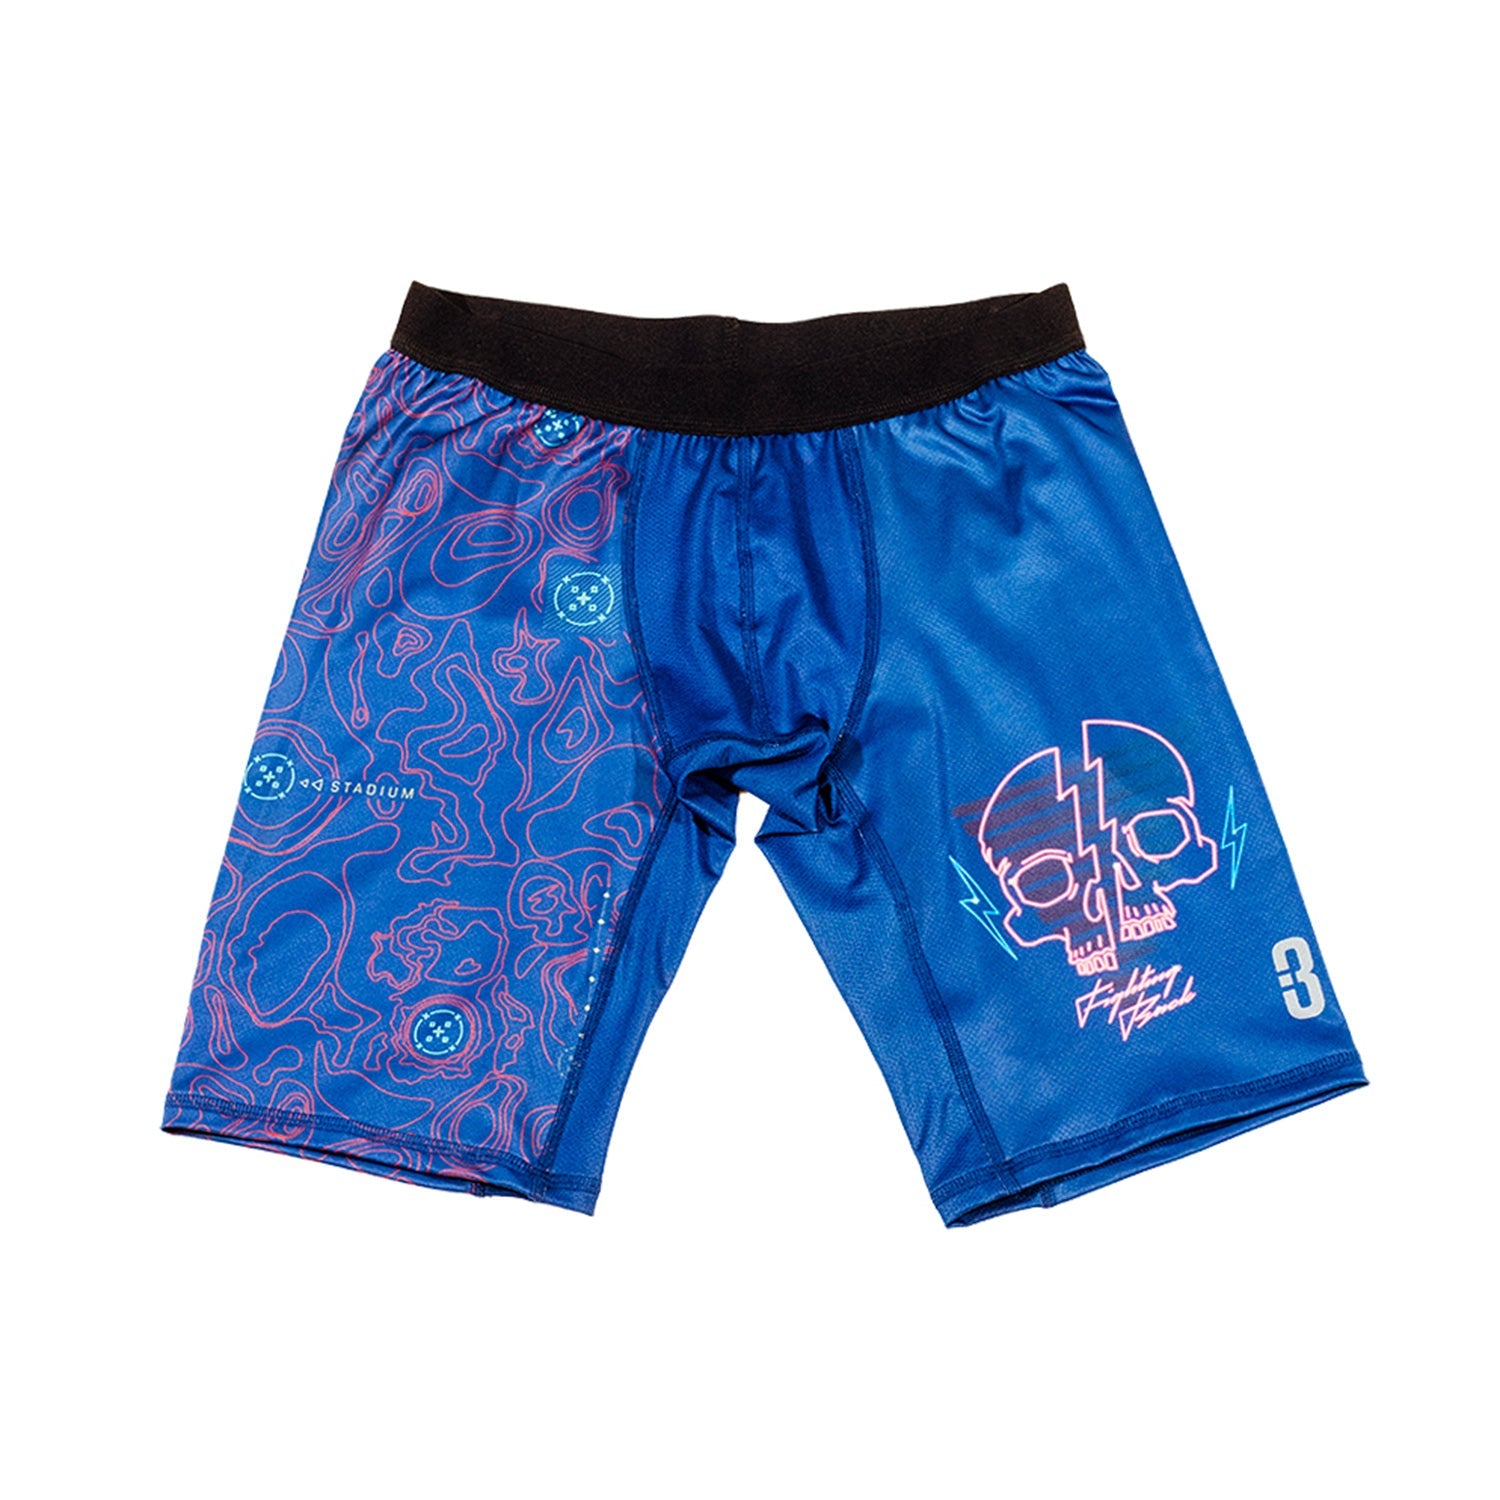 Call of Duty Warzone Point3 Blue Compression Shorts - Front View